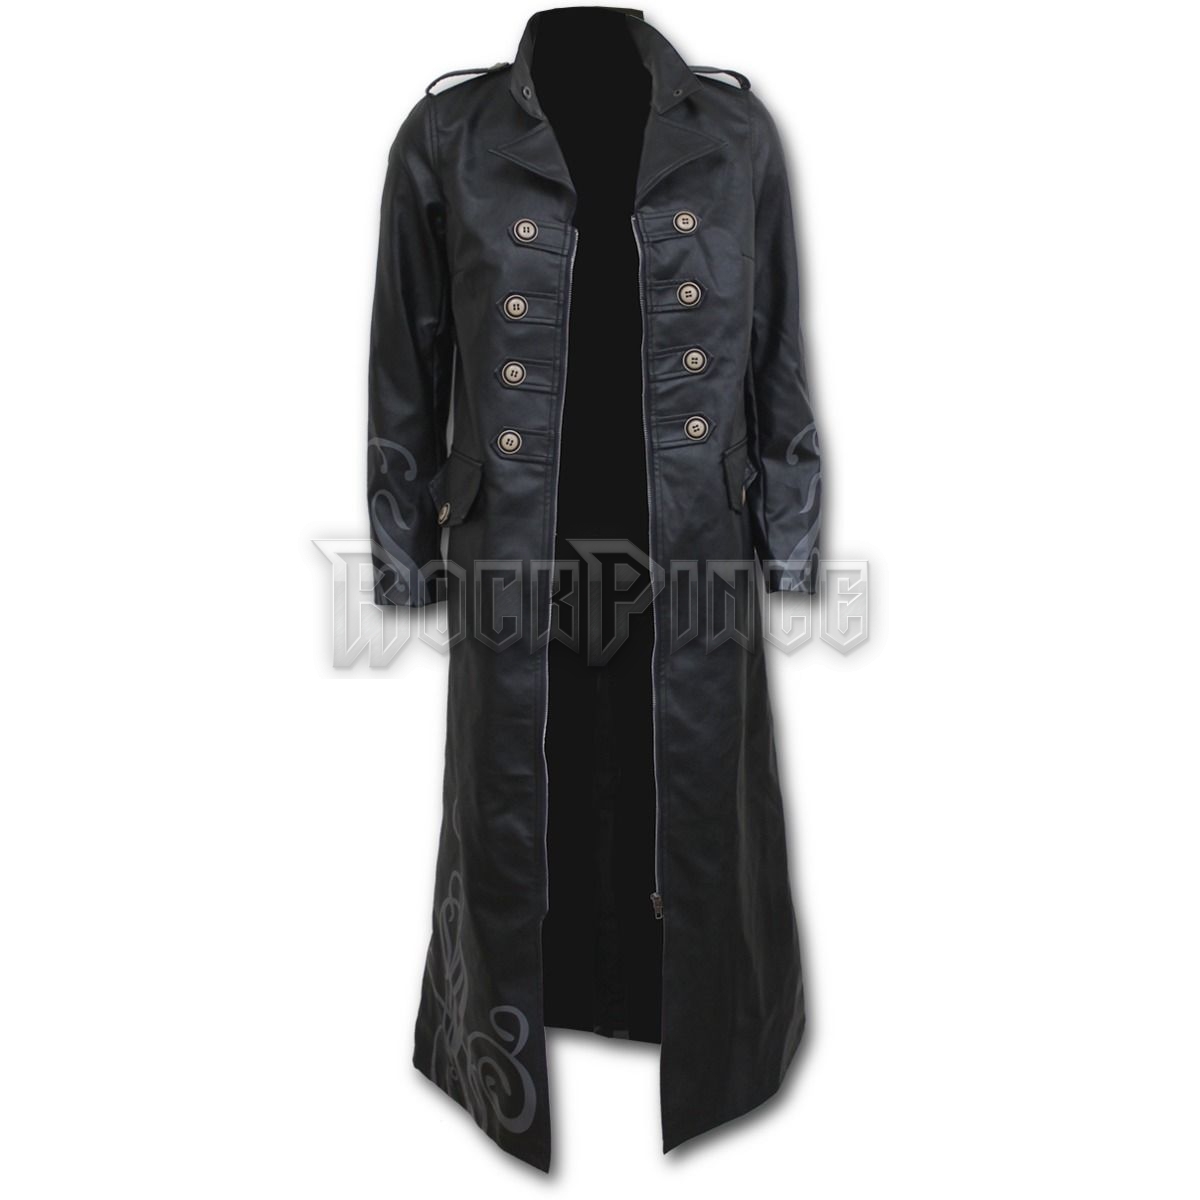 FATAL ATTRACTION - Gothic Trench Coat PU-Leather Corset Back (Plain) - D061G406